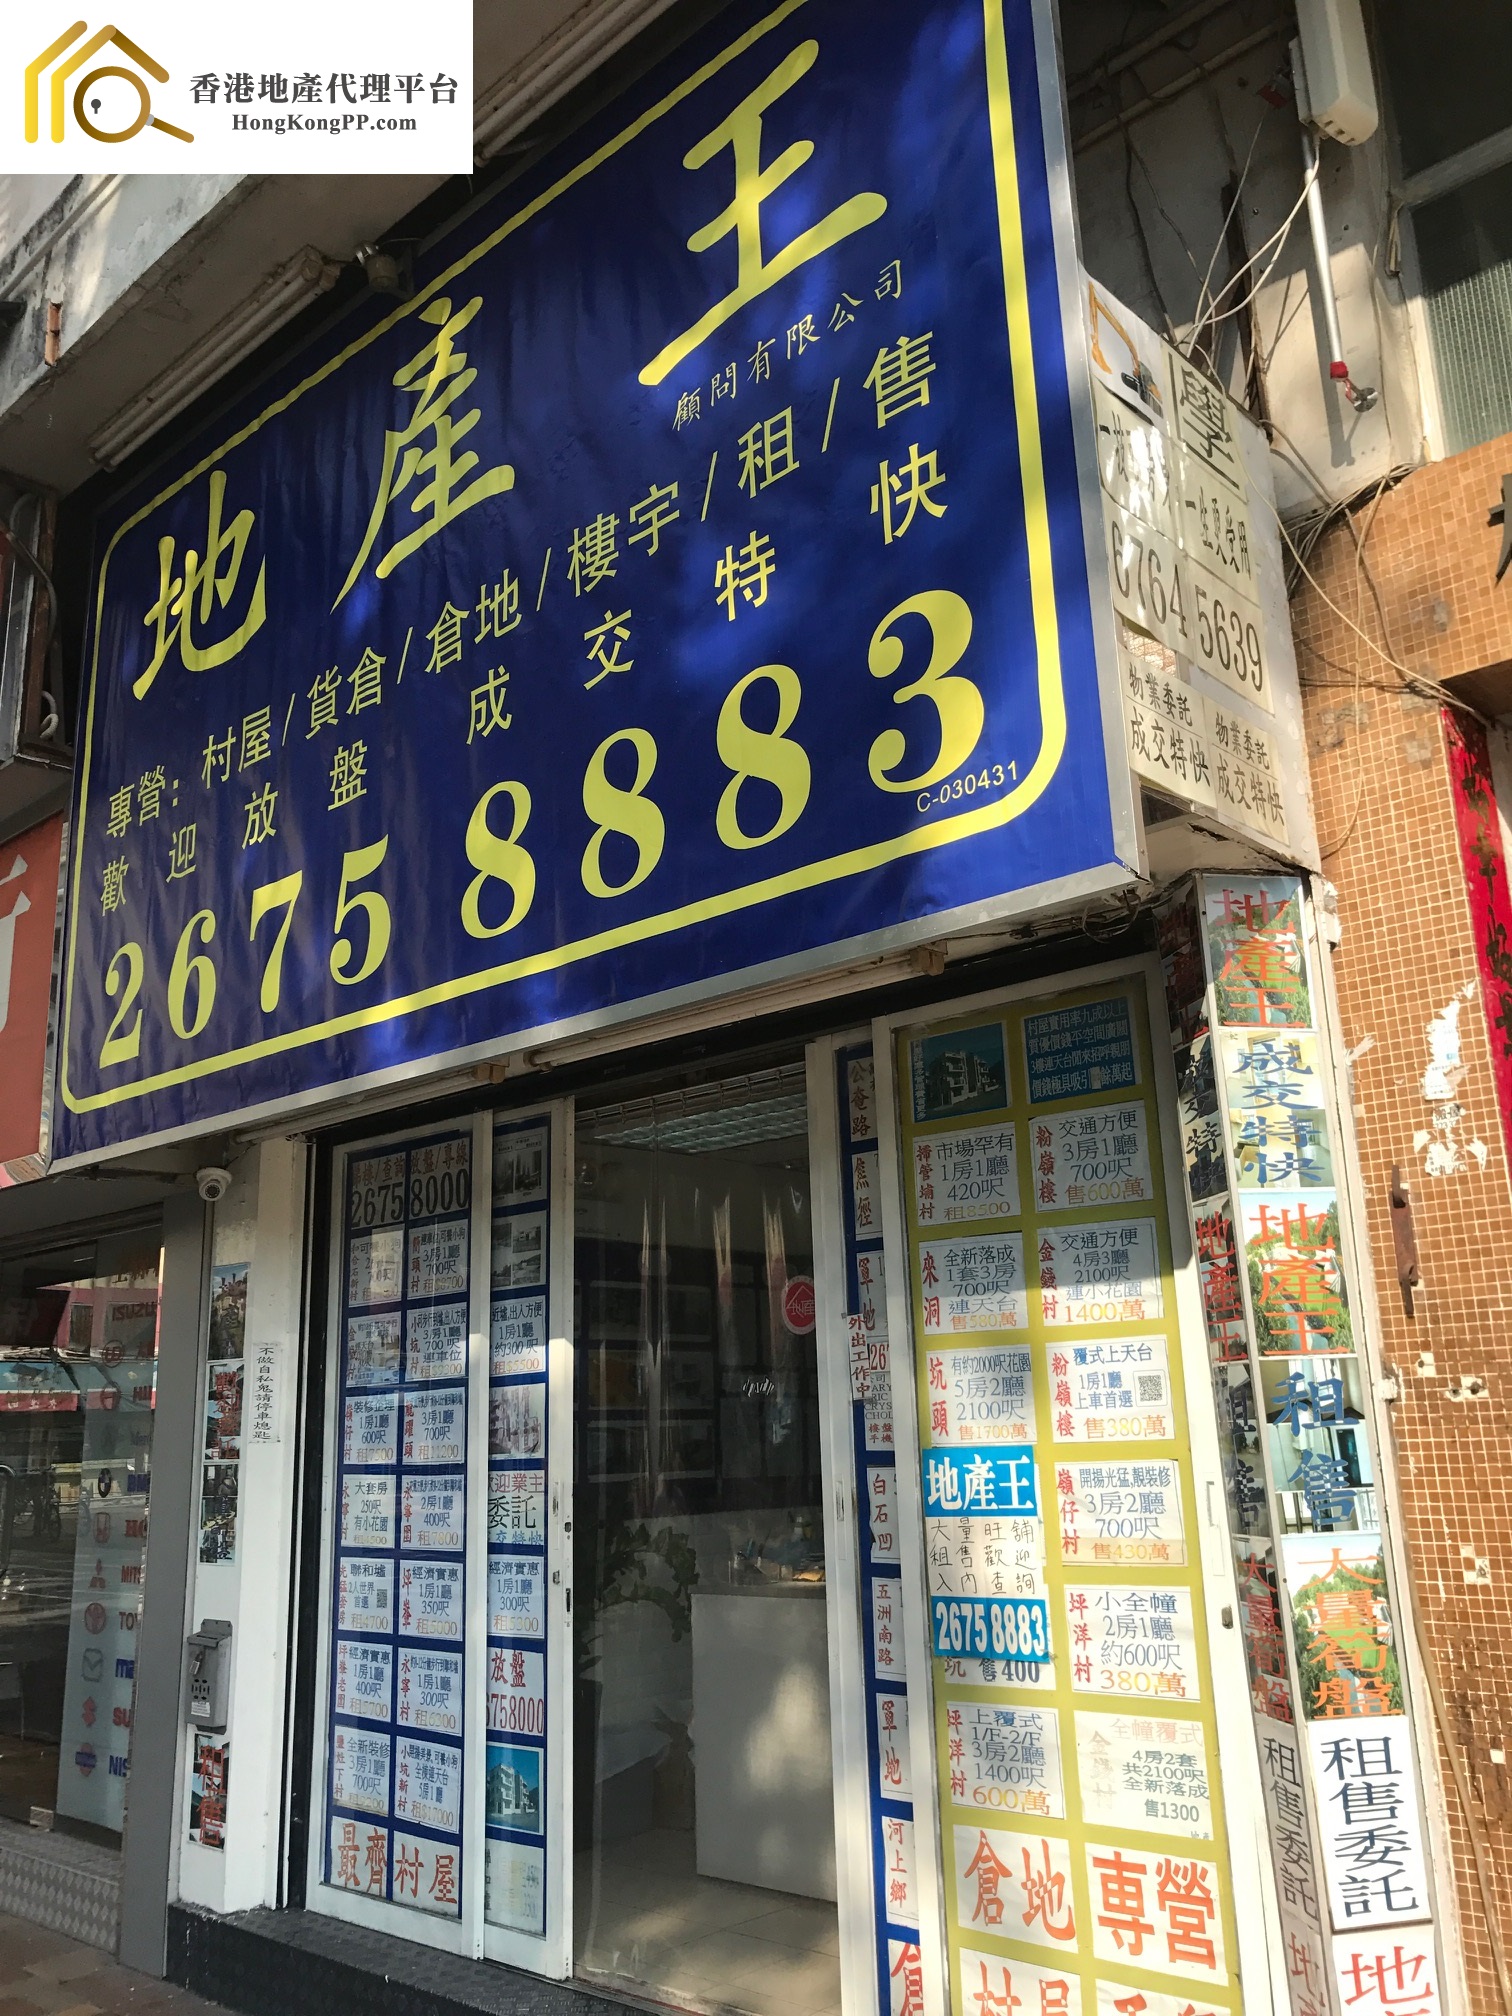 ShopEstate Agent: 地產王 King of Property Consultants